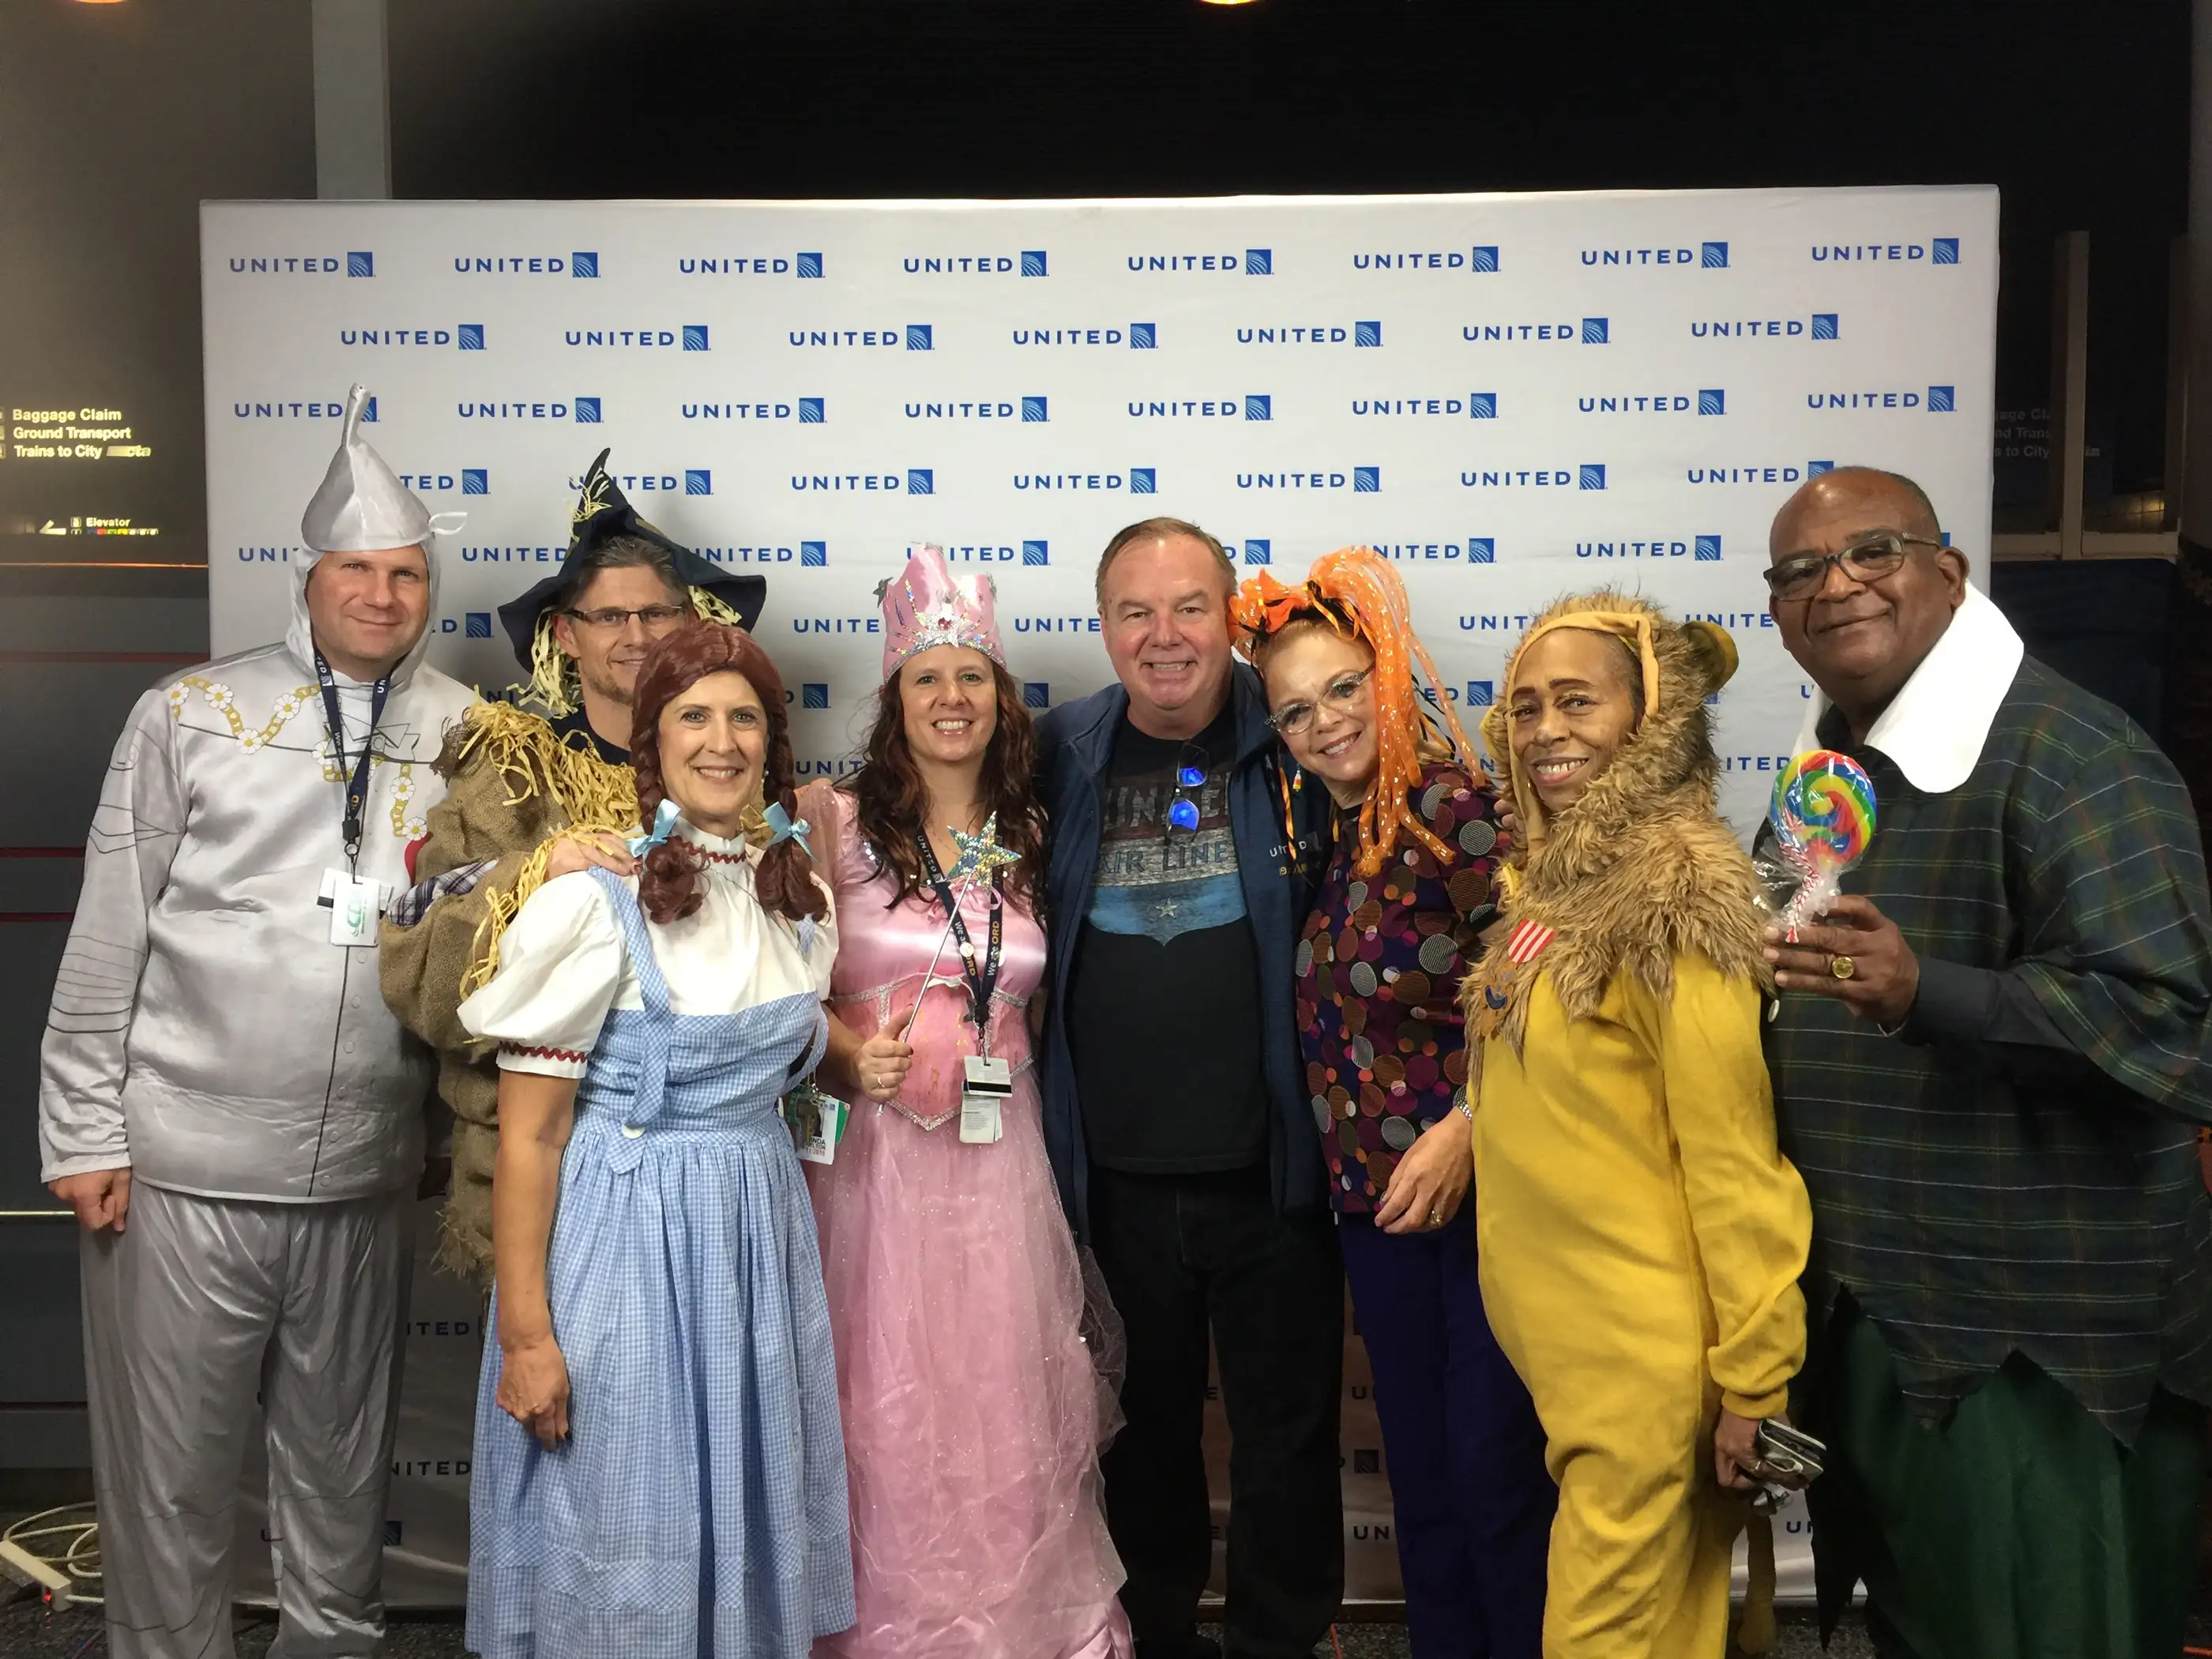 Tom Stuker with United employees at ORD that dressed up for Halloween in 2018.